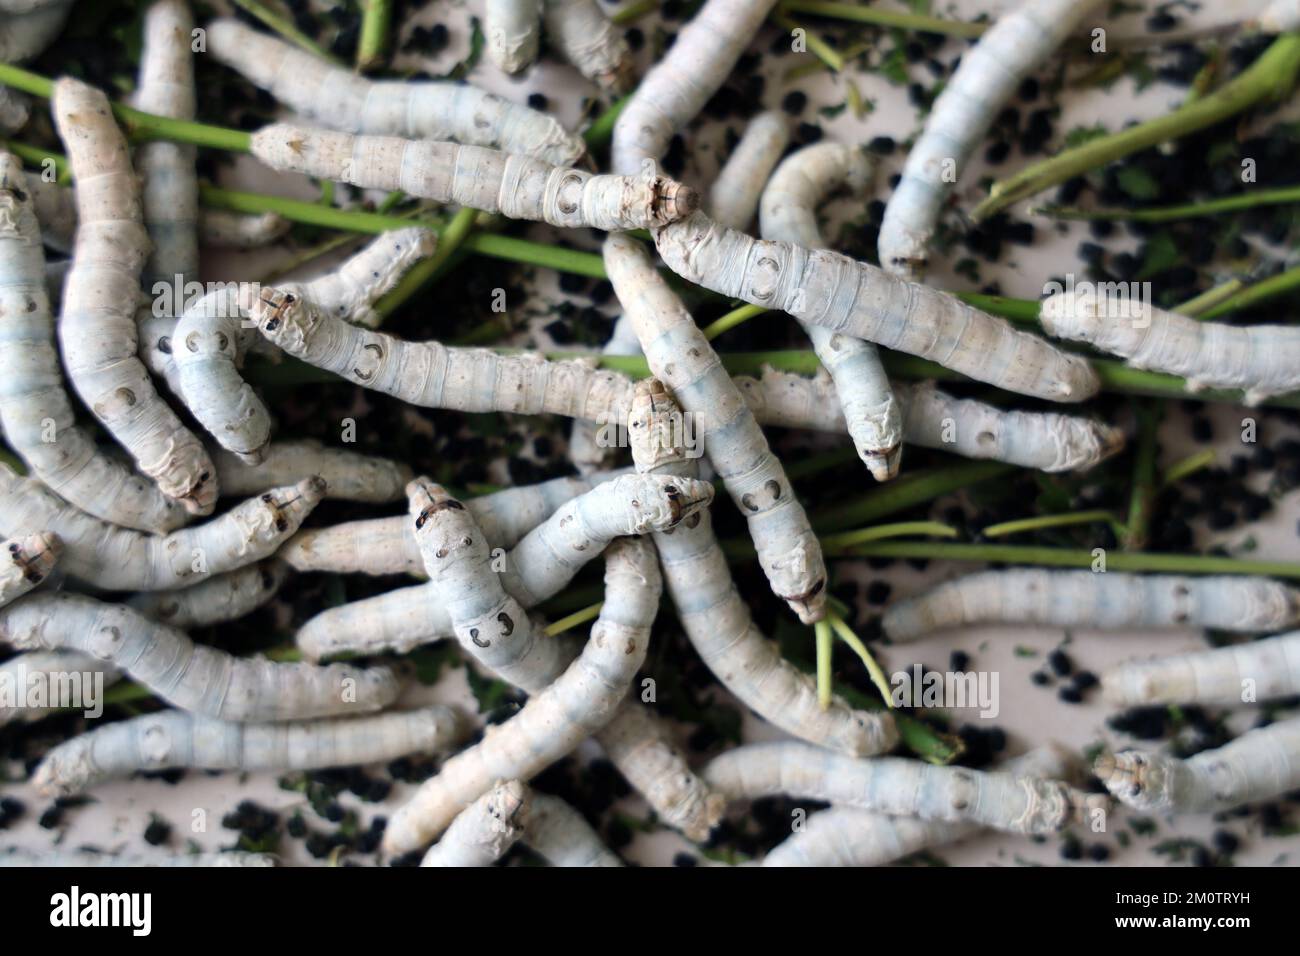 The silkworm is the larva or caterpillar of the domestic. It is an economically important insect, being a primary producer of silk. Stock Photo